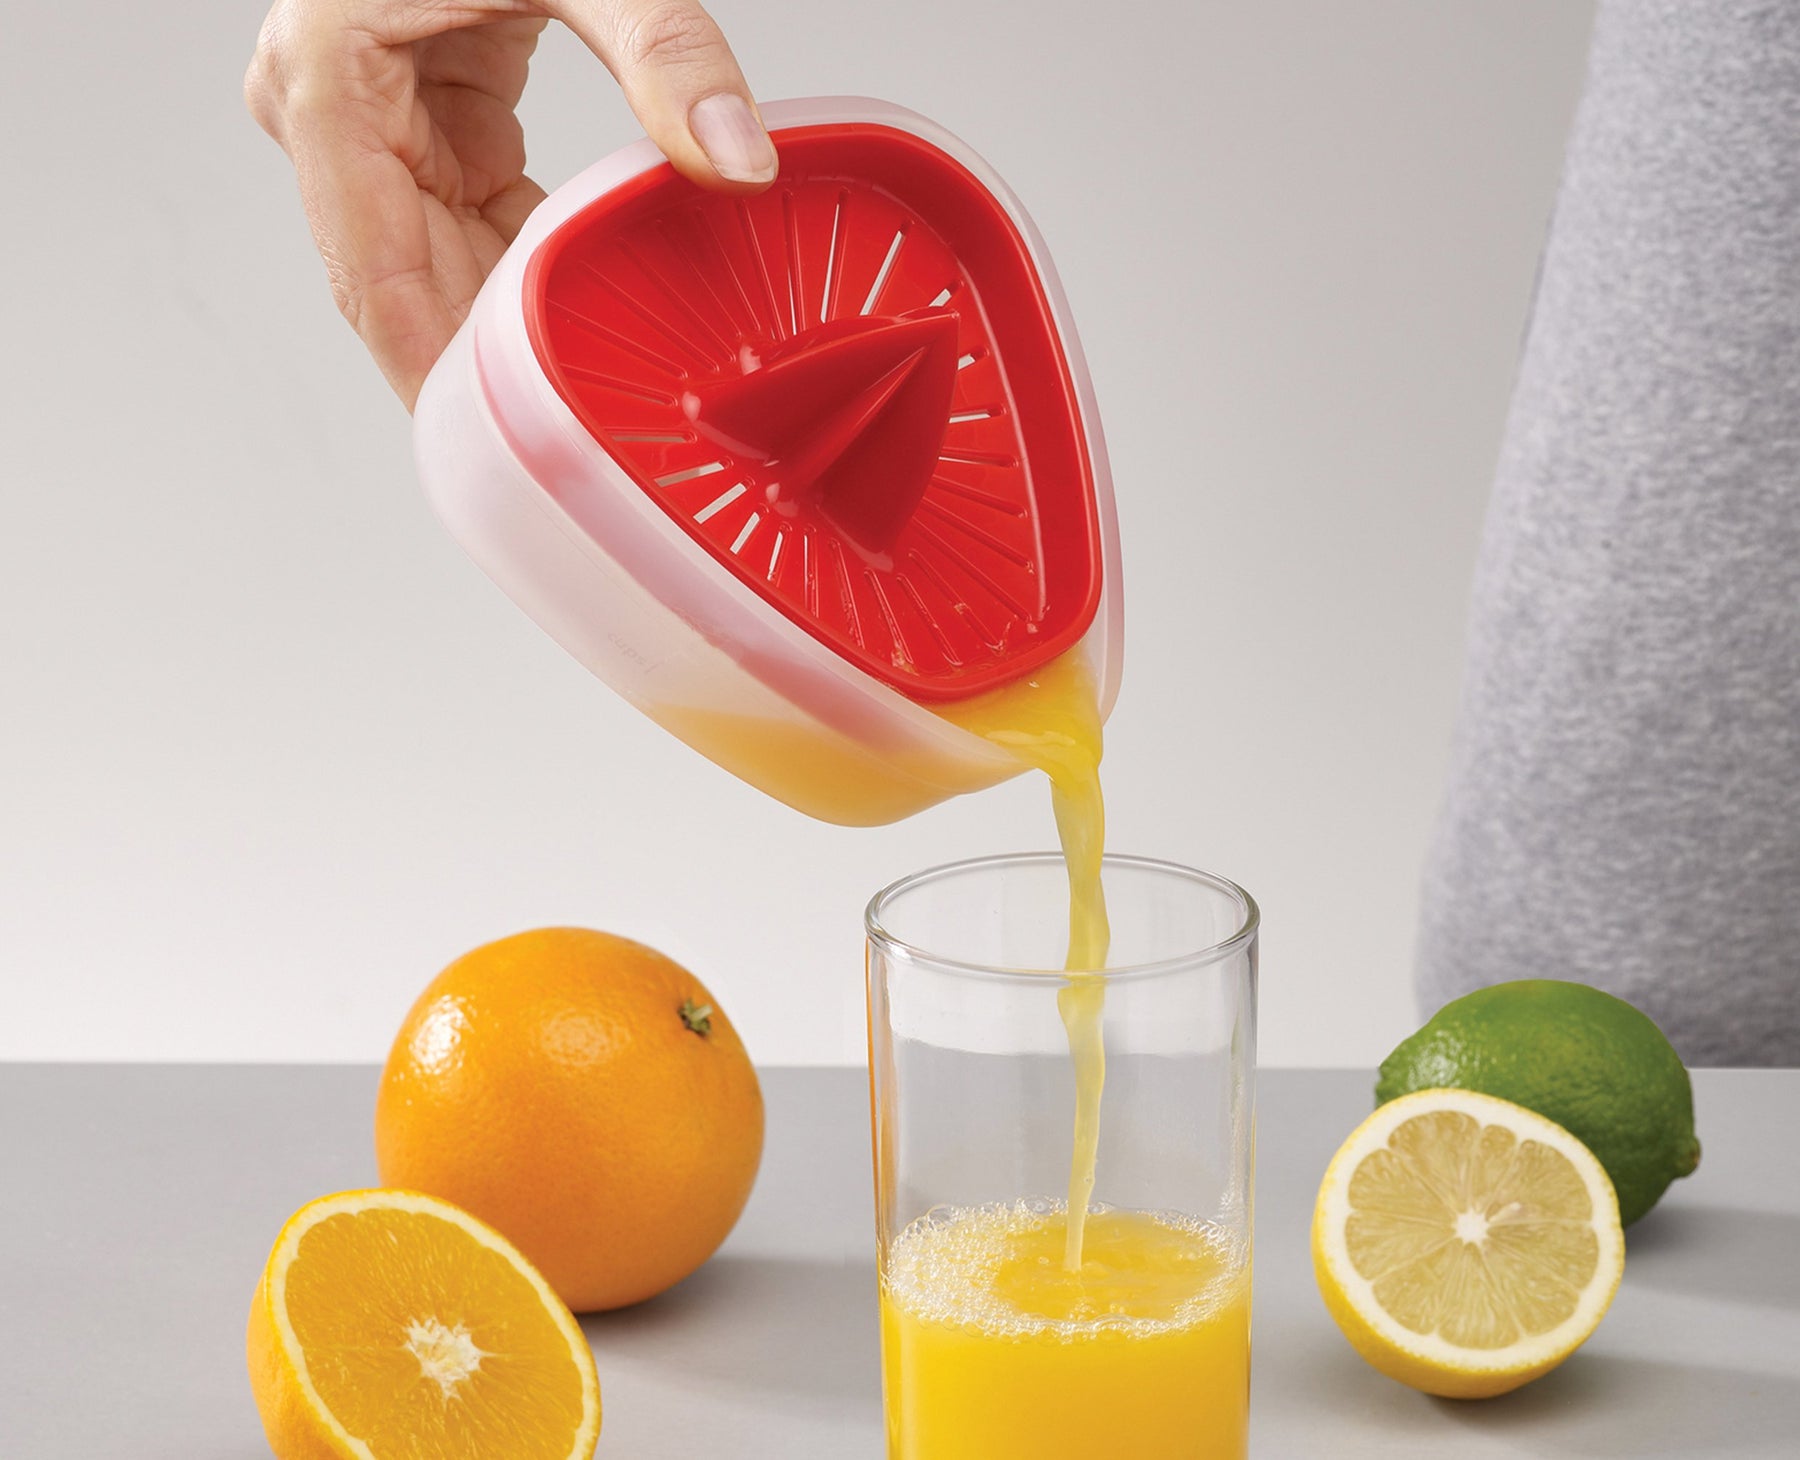 Duo Compact Juicer - Easy pouring